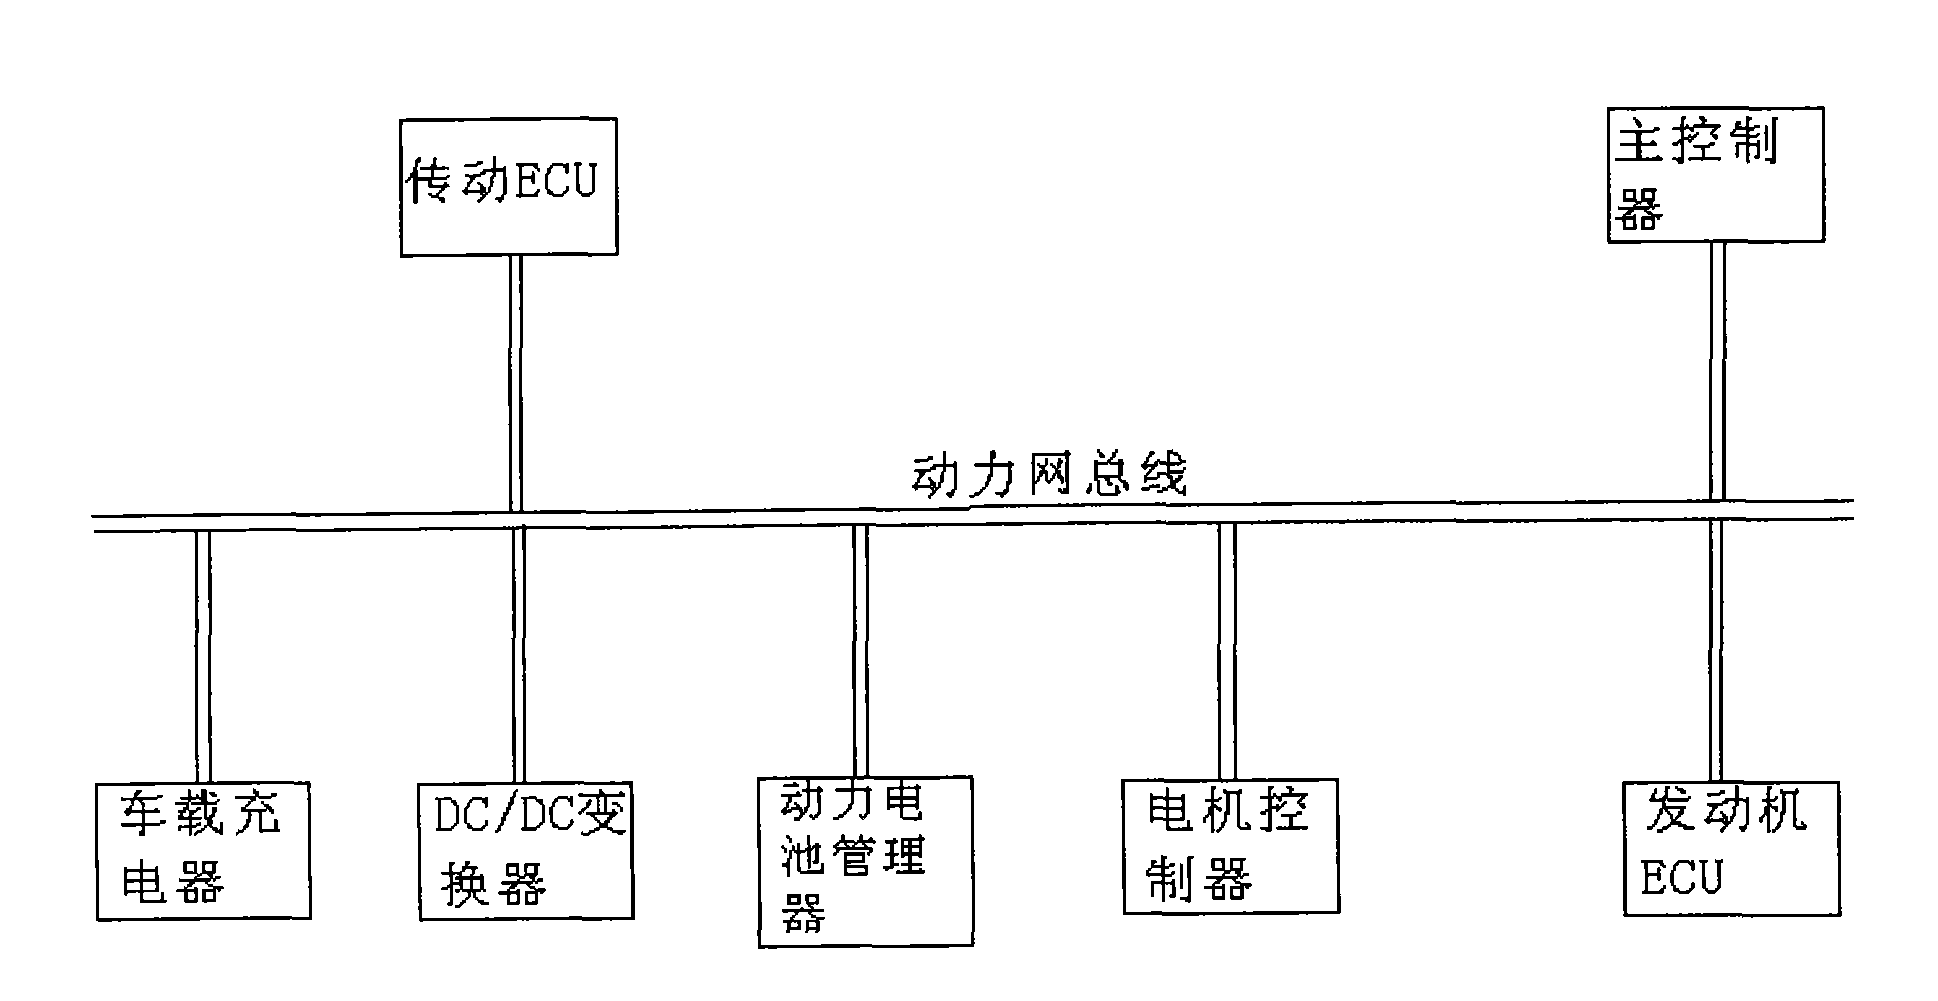 Method for monitoring operation state of overall network in network structure of control area network